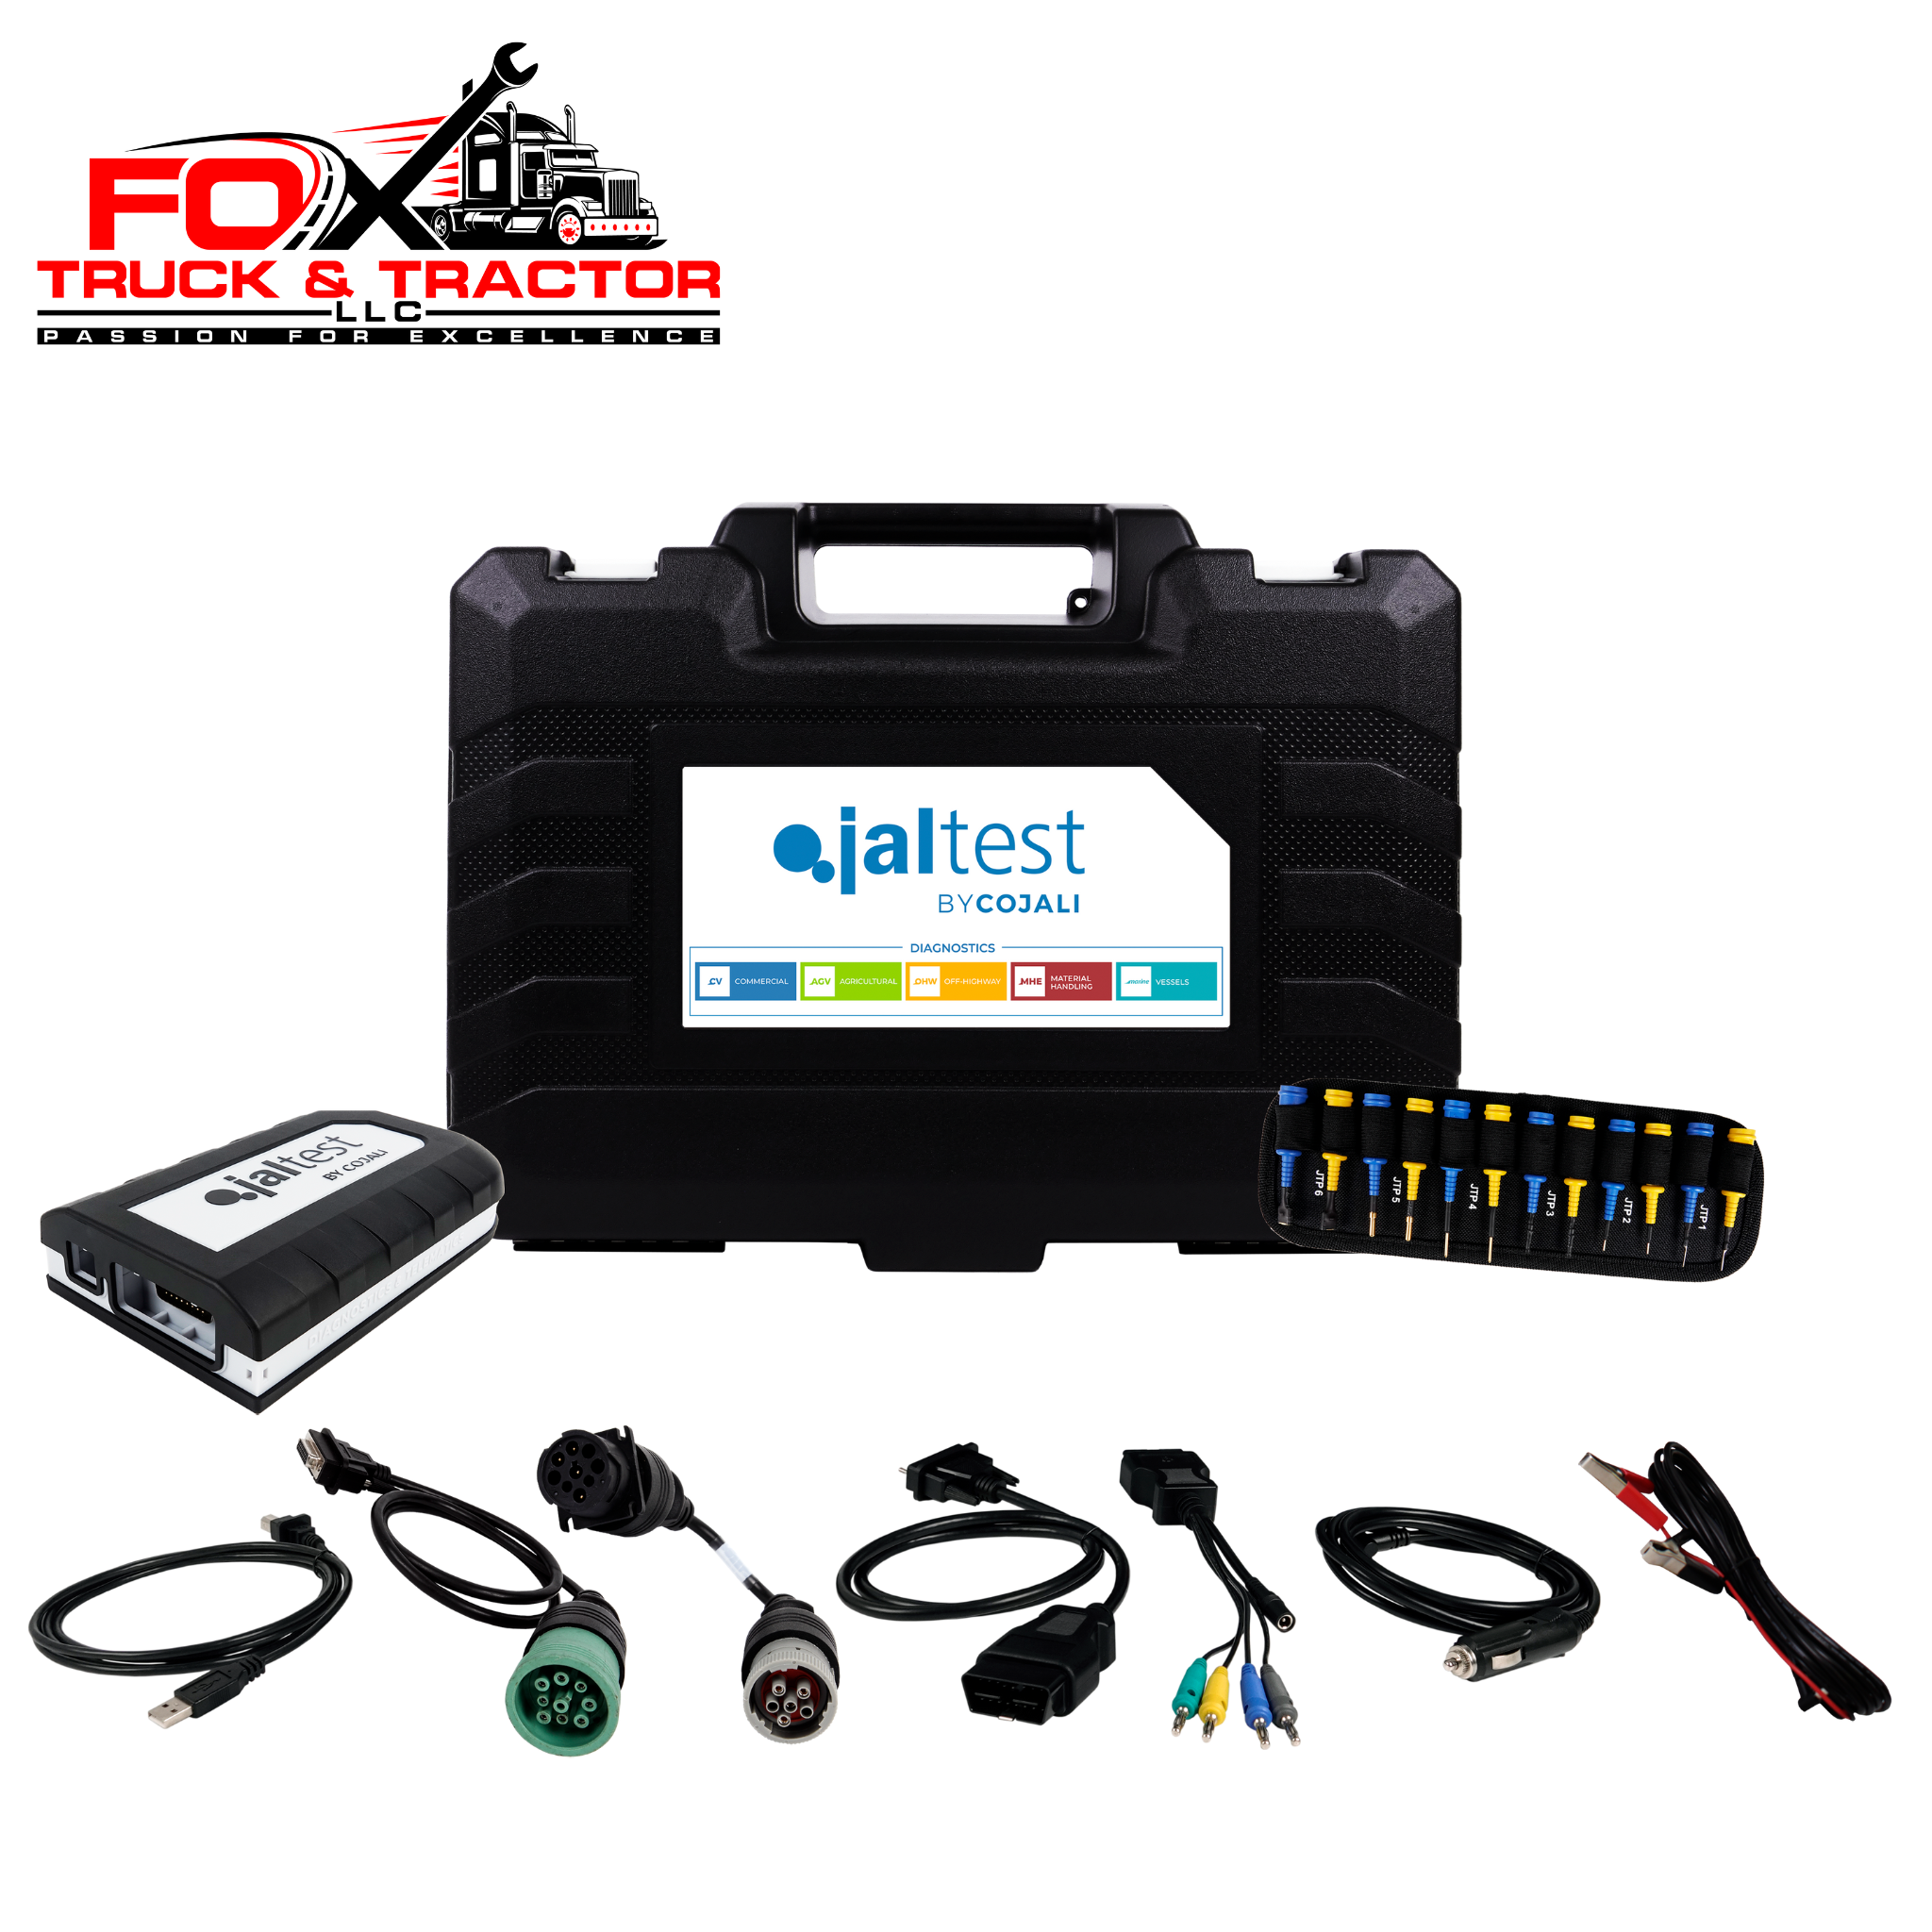 29209 - Cojali Jaltest Commercial Vehicle Kit (WITH MULTIPINS)